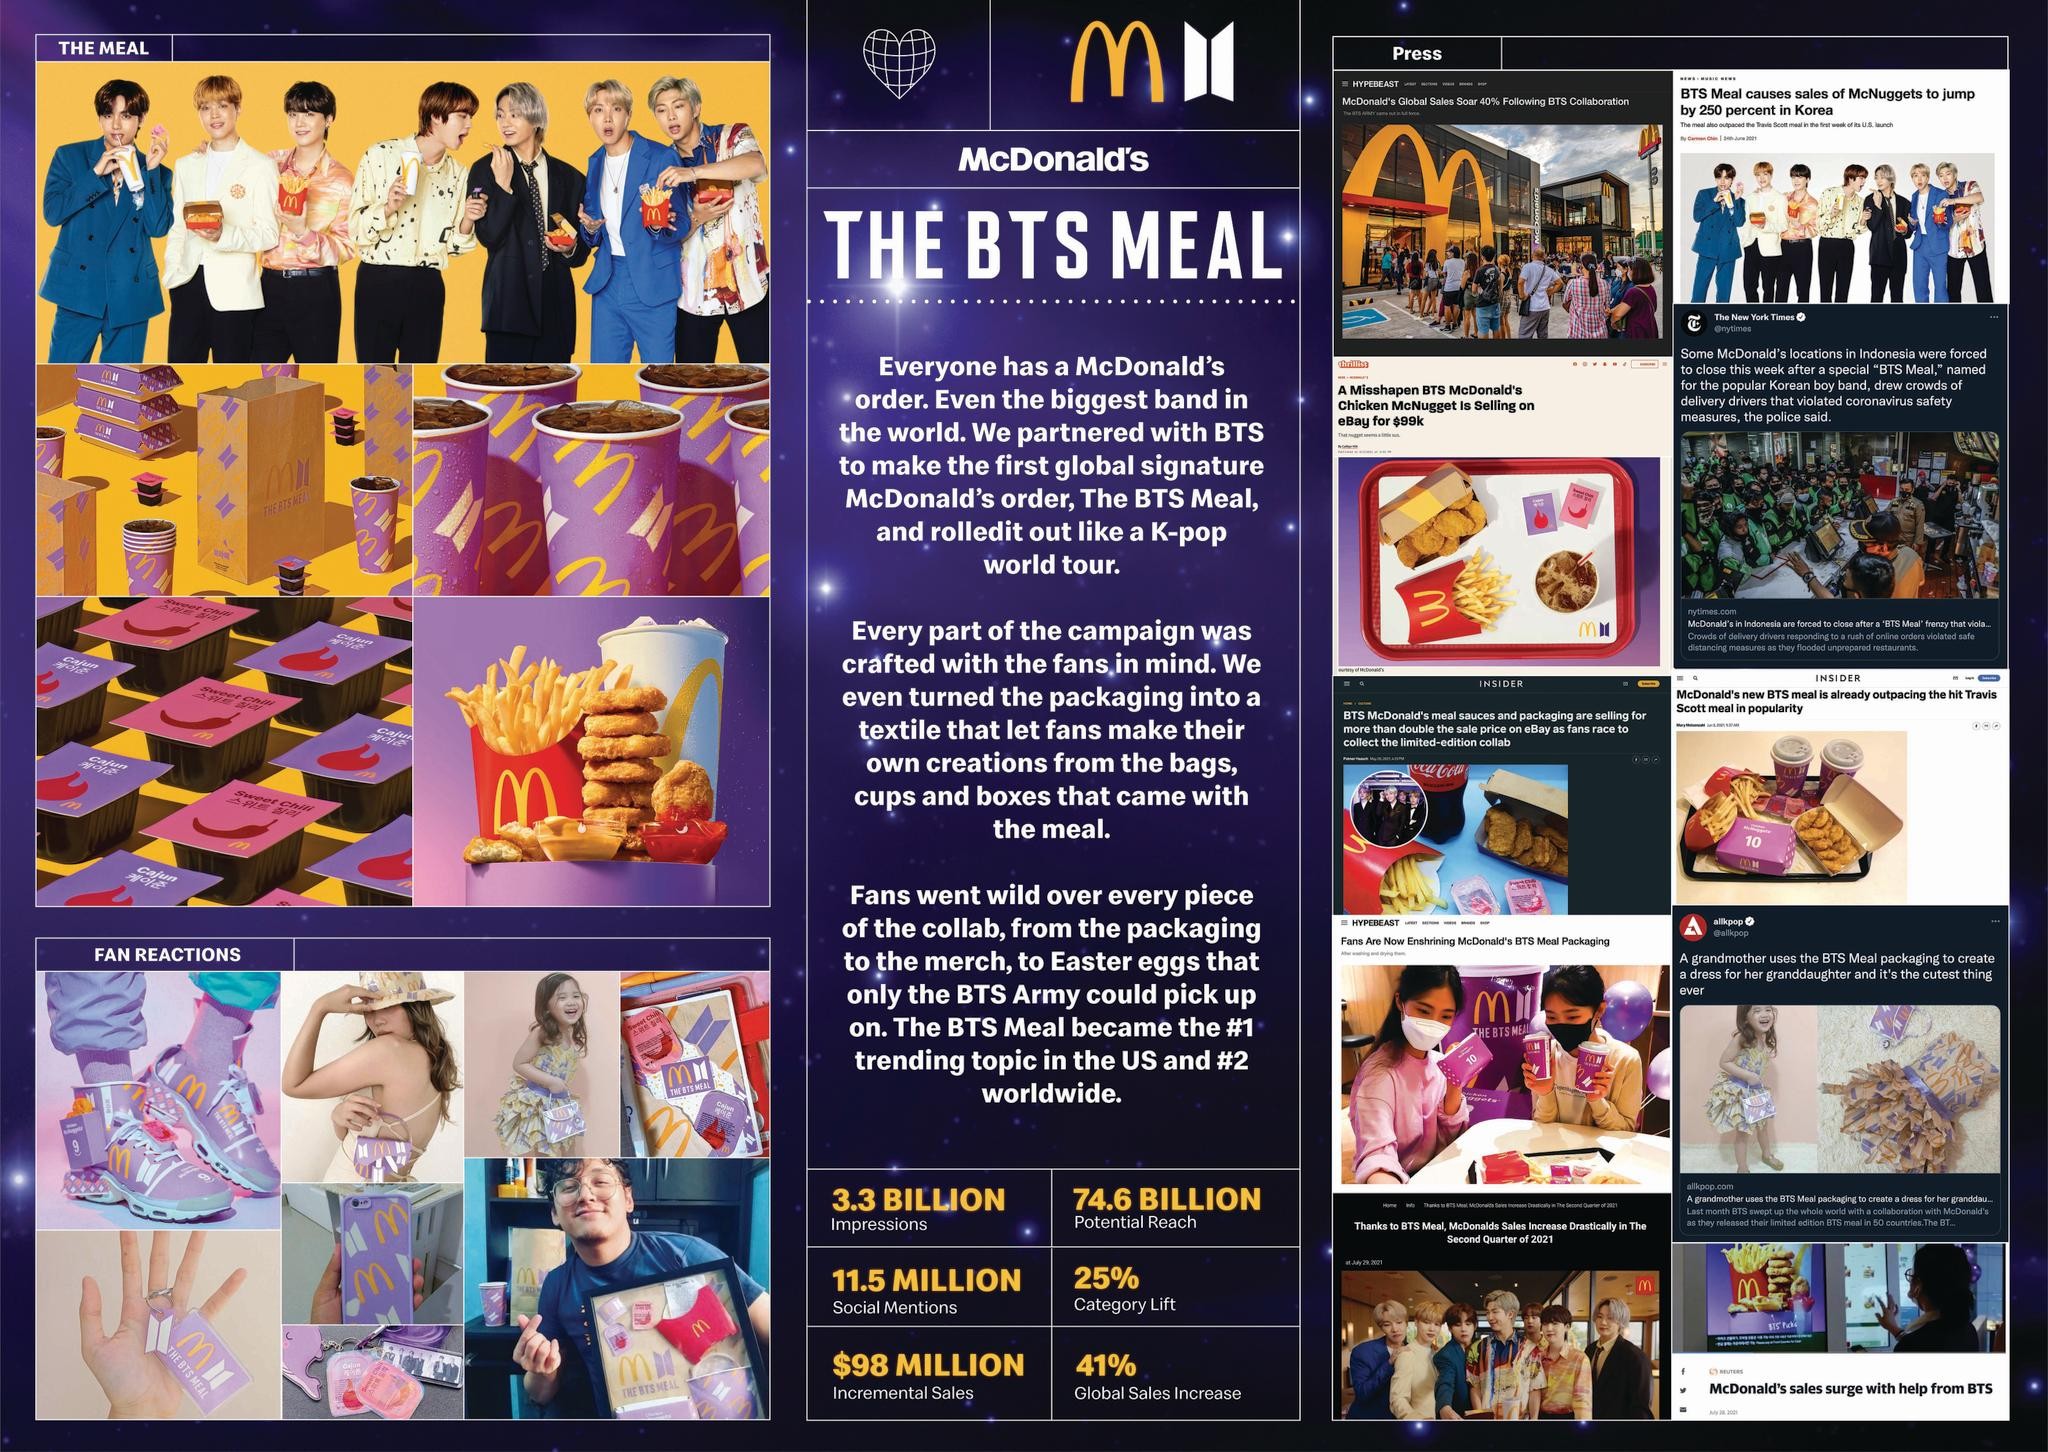 MCDONALD'S: THE BTS MEAL